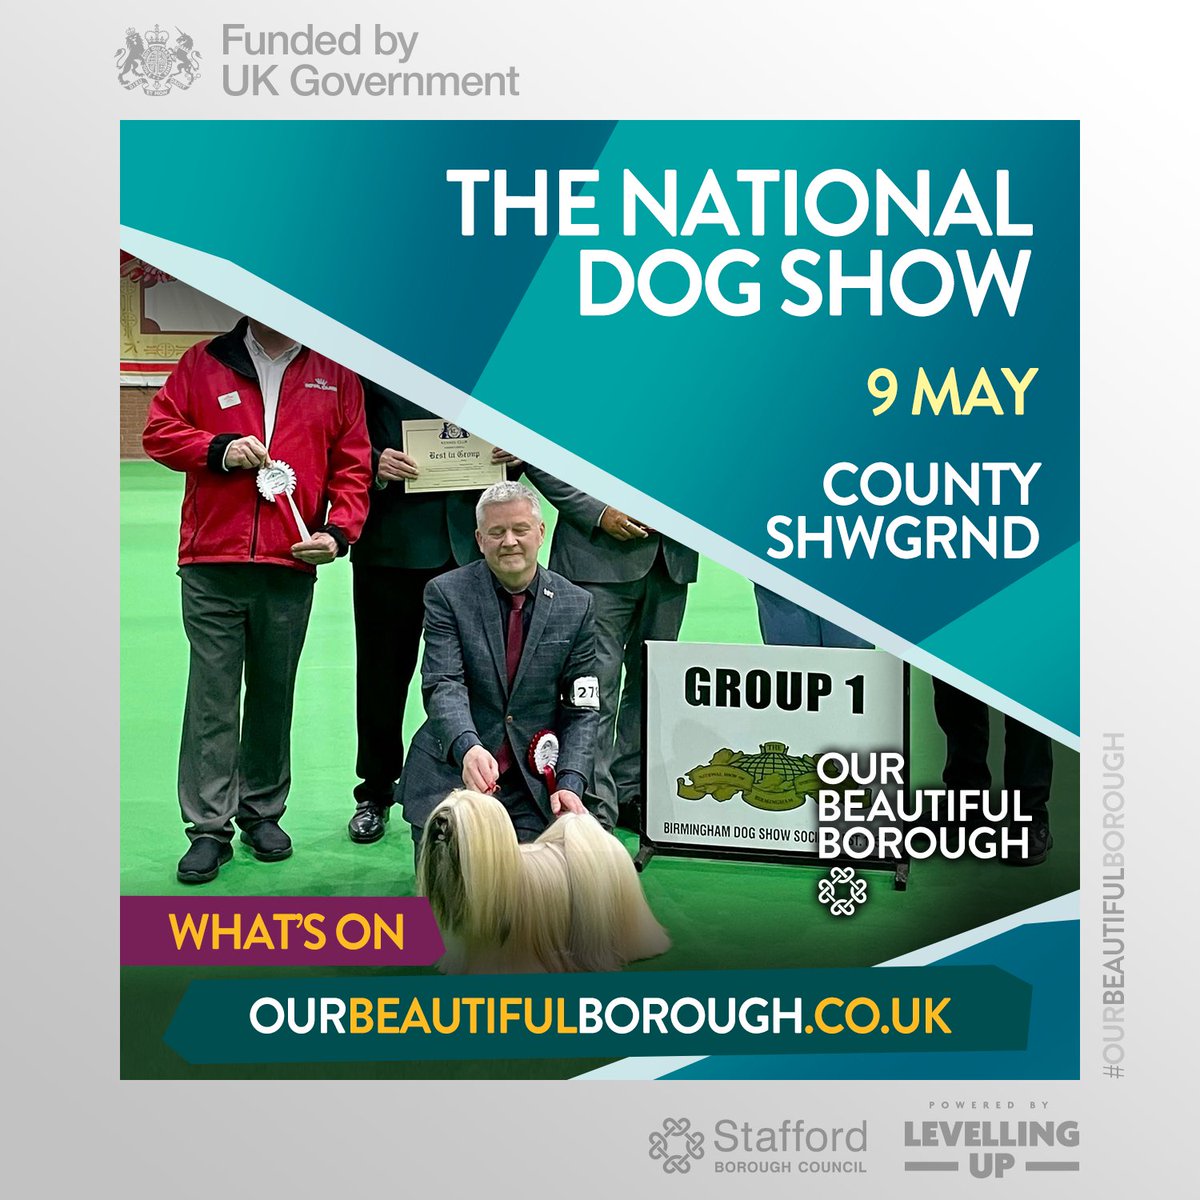 The #National #Dog #Show returns to #Staffordshire #County #Showground for four days of fun with man's best friend from 9-12 May. All dogs and dog enthusiasts are welcome to visit the show. Further information here: tinyurl.com/4m2hn4kt #DaysOut #FamilyFun #OurBeautifulBorough